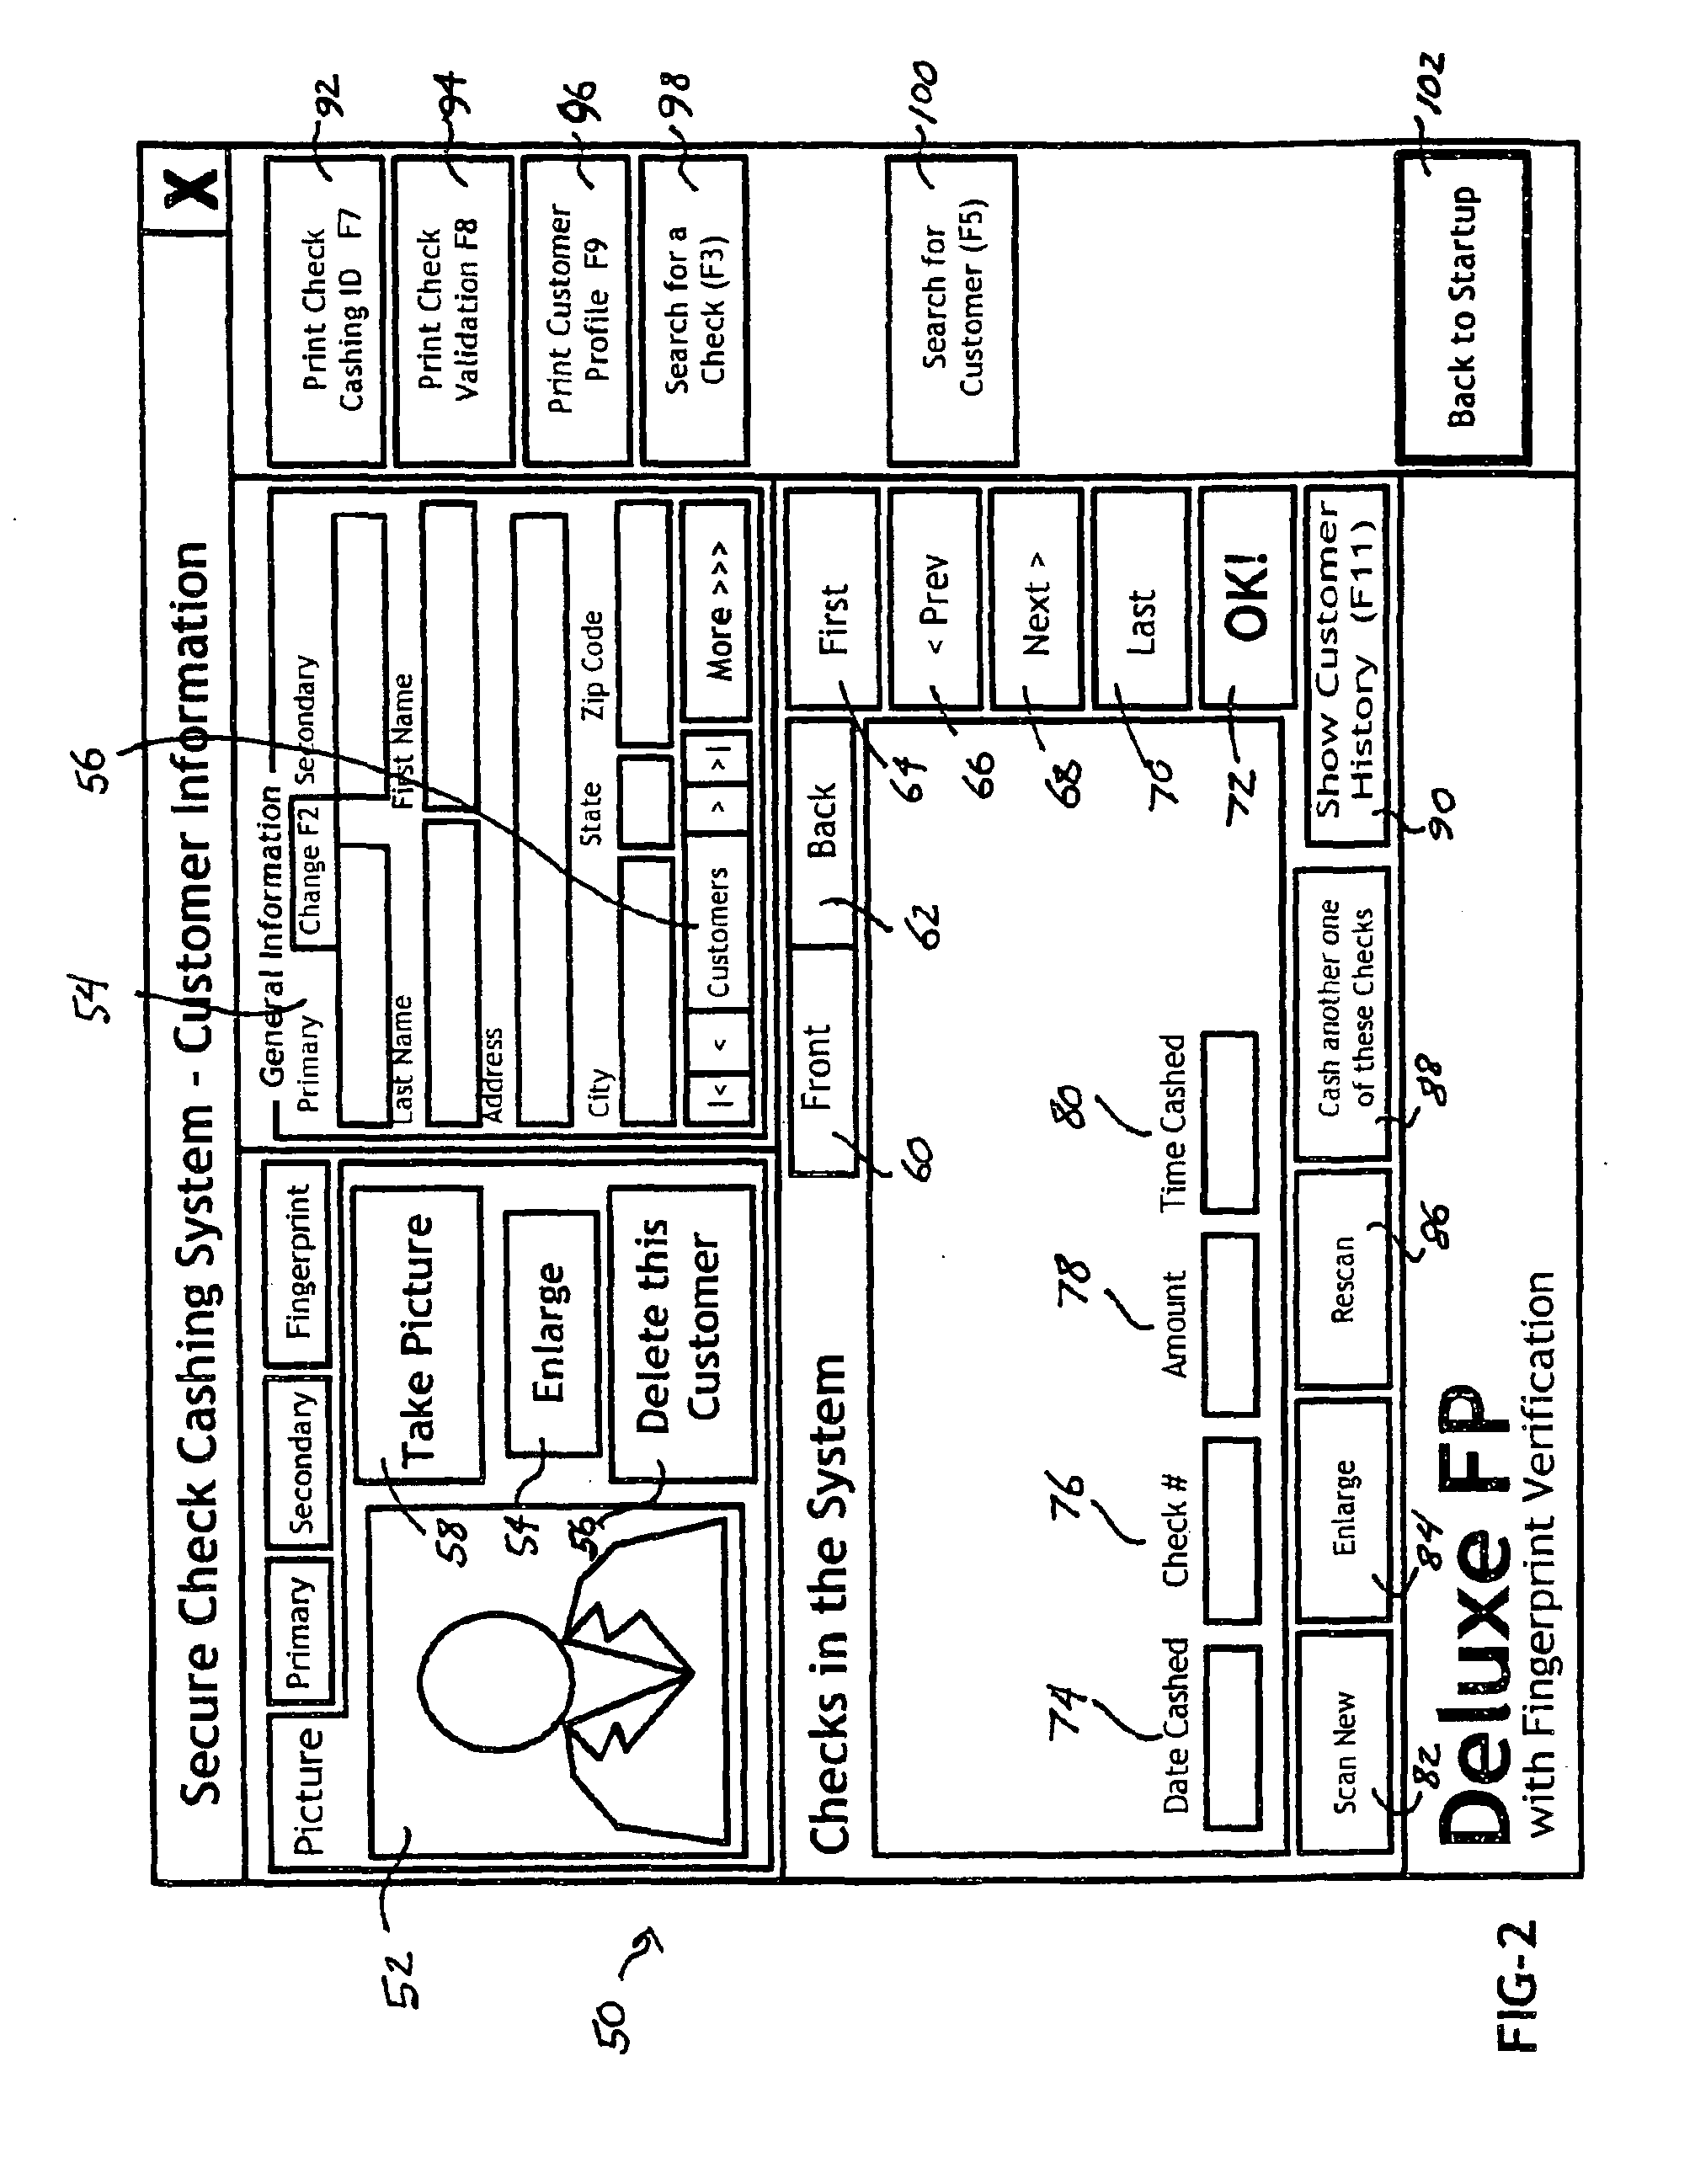 System and method for gathering customer information for completing check cashing transactions